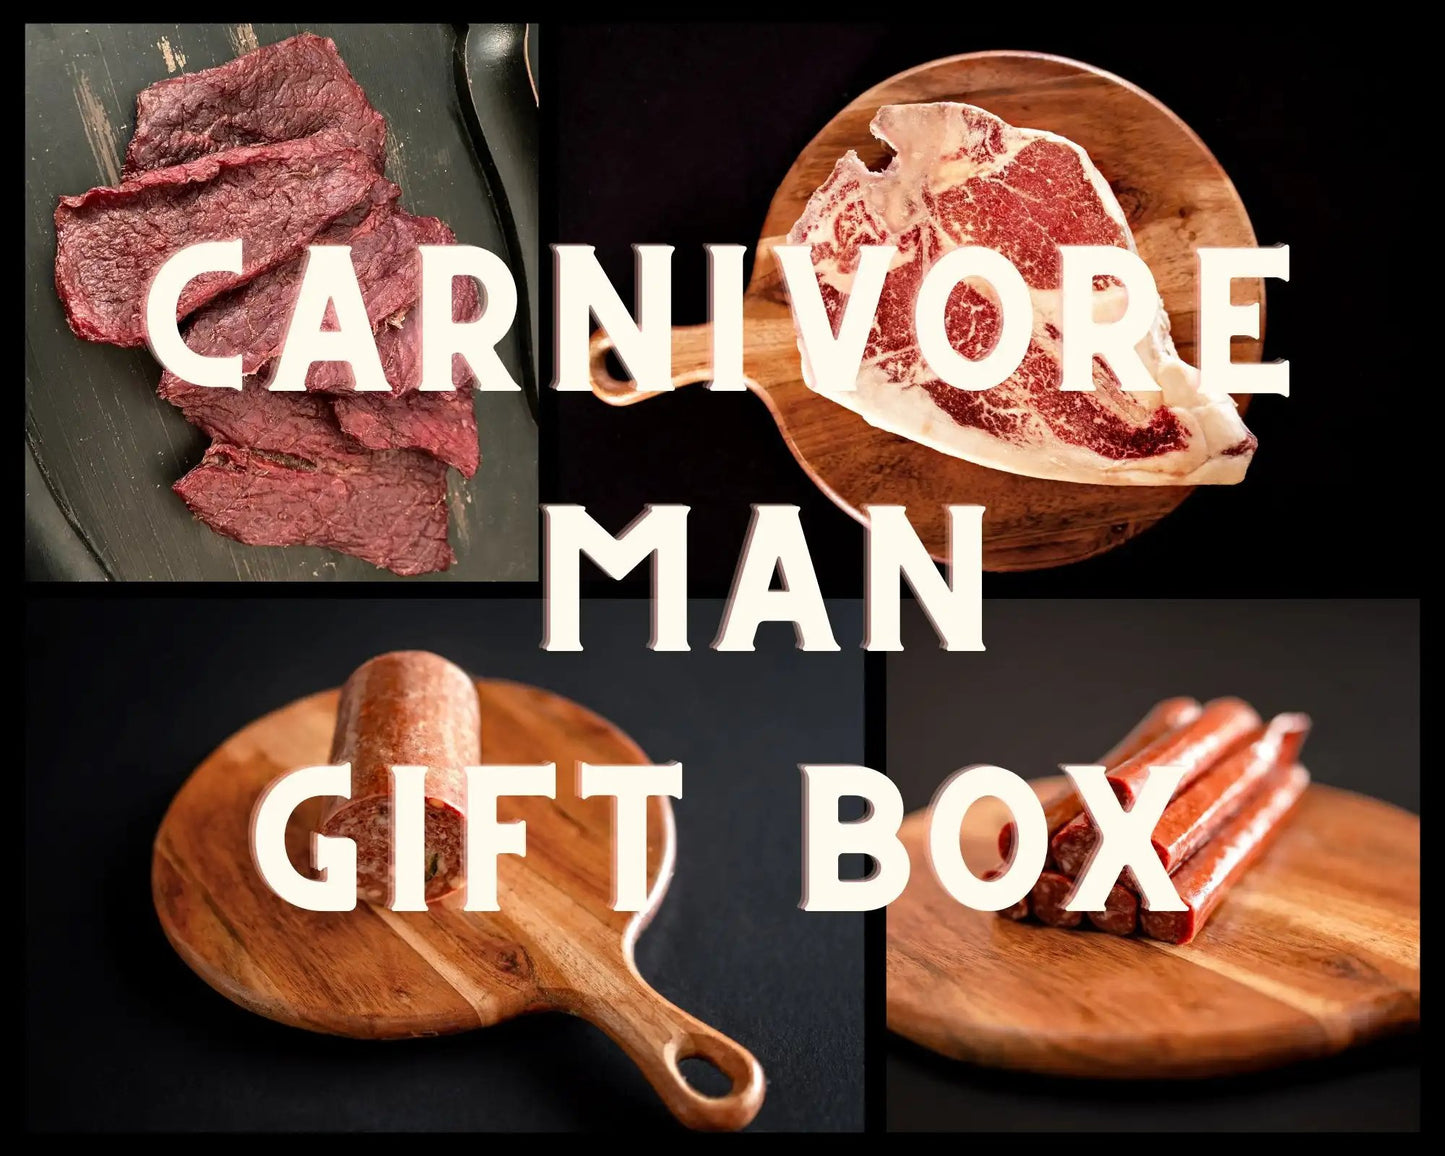 100% All-Natural Grass-Fed Pasture-Raised Wagyu Carnivore Man Gift Box - The Hufeisen-Ranch (WYO Wagyu)